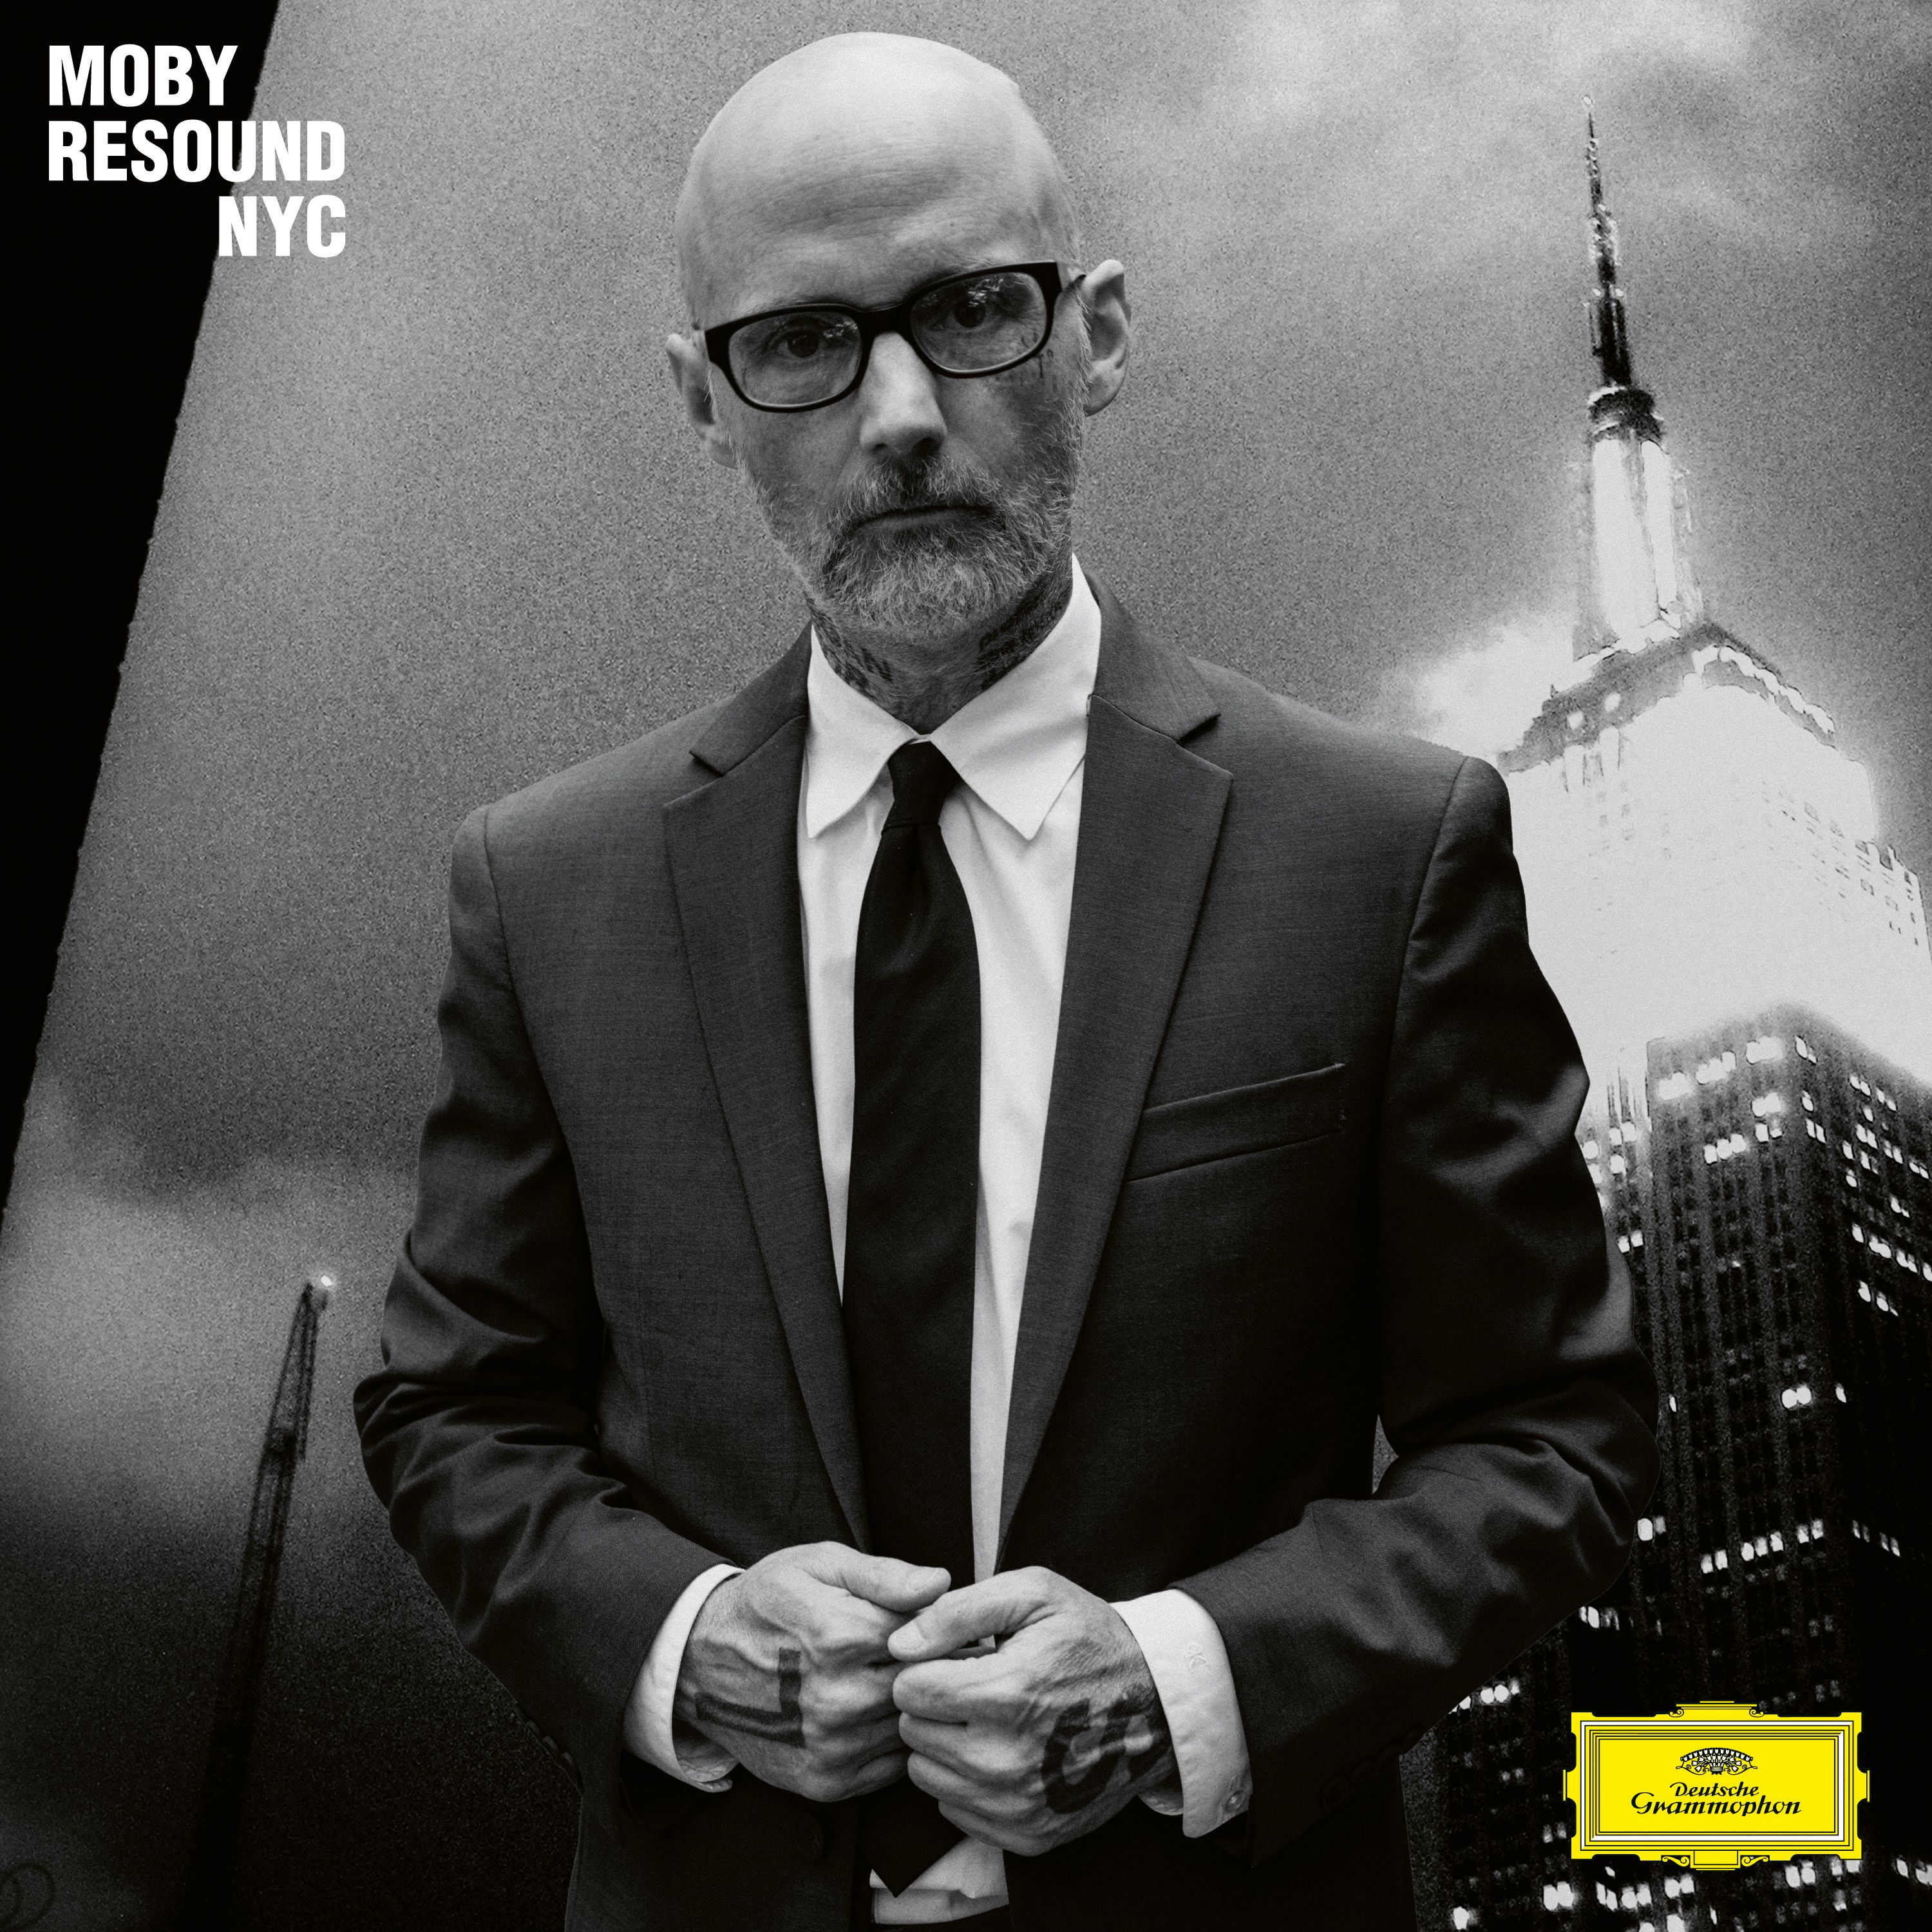 Resound NYC, Moby